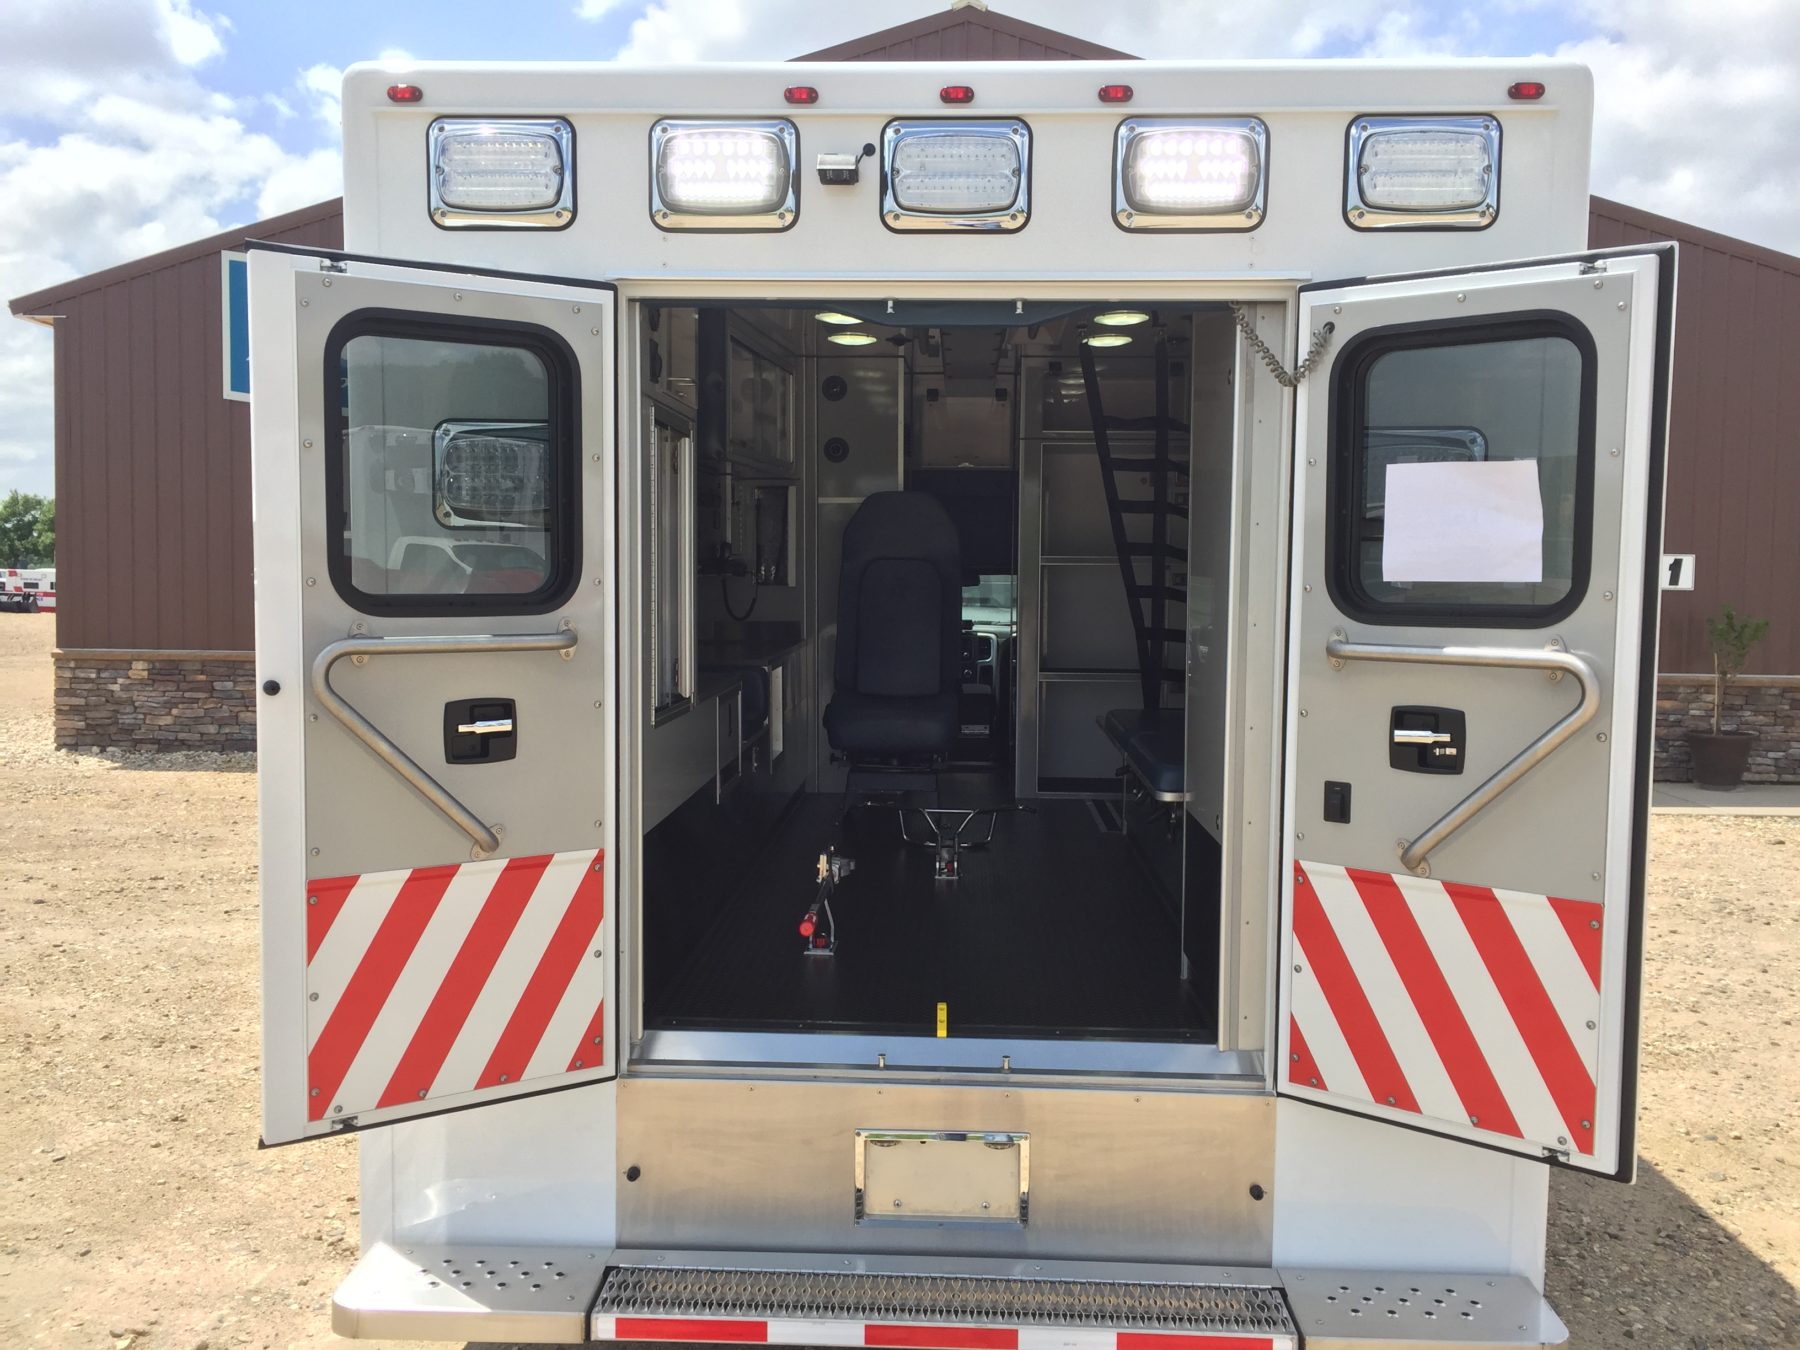 2017 Ram 4500 4x4 Heavy Duty Ambulance For Sale – Picture 9